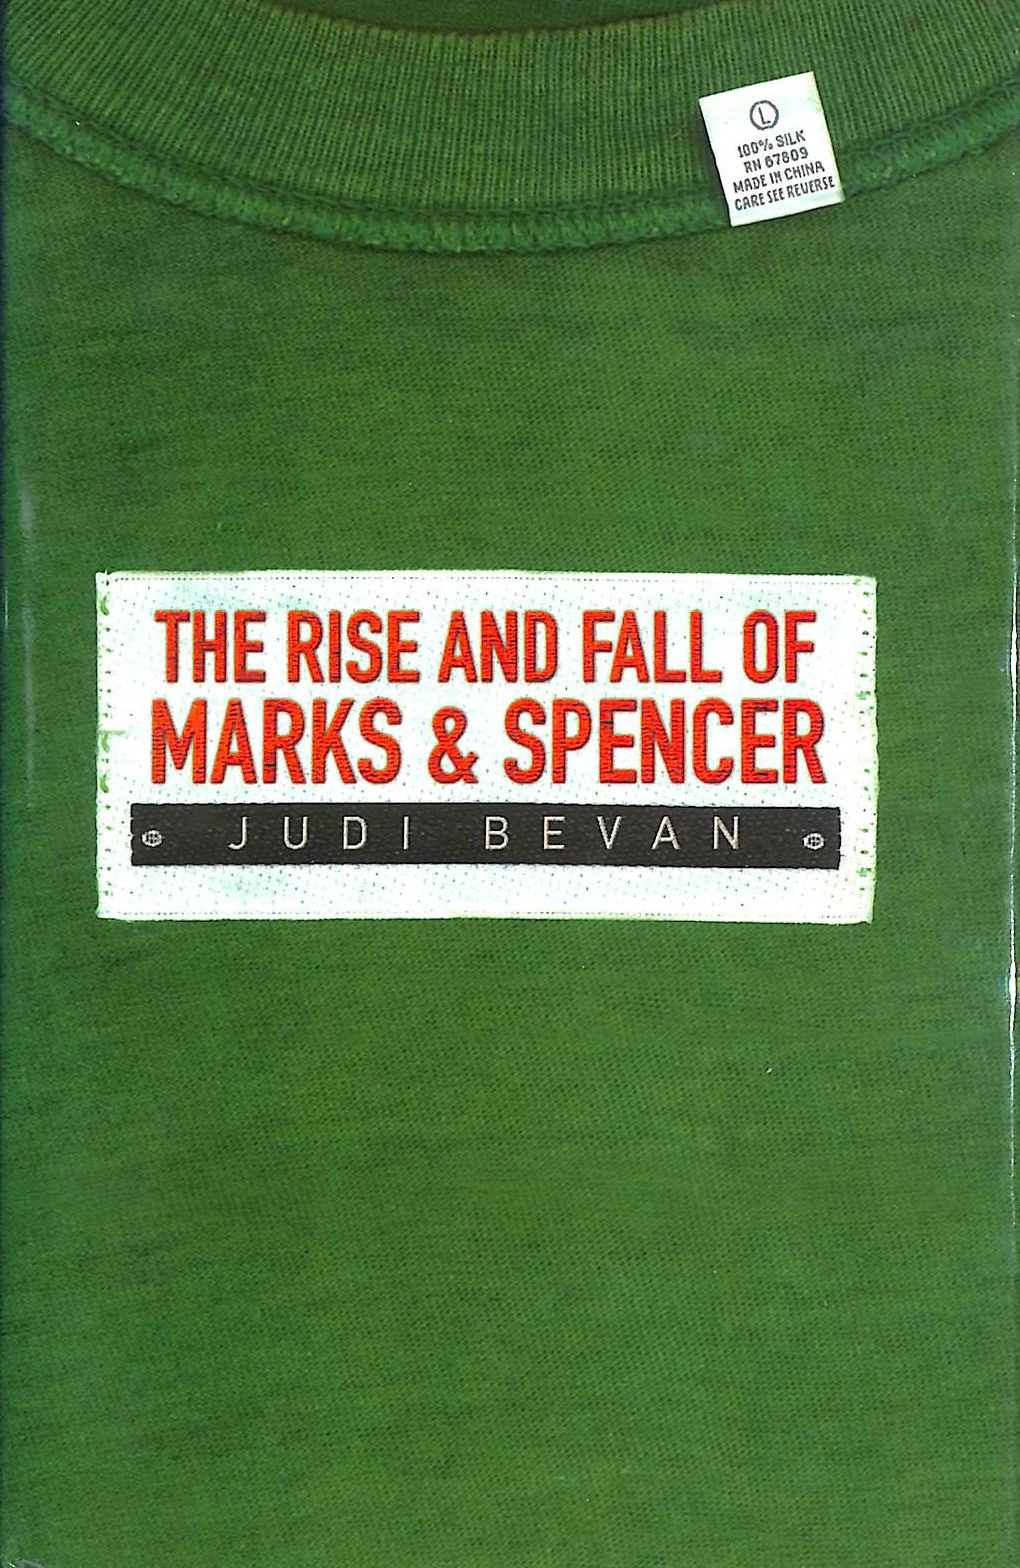 BEVAN, JUDI - The Rise and Fall of Marks & Spencer